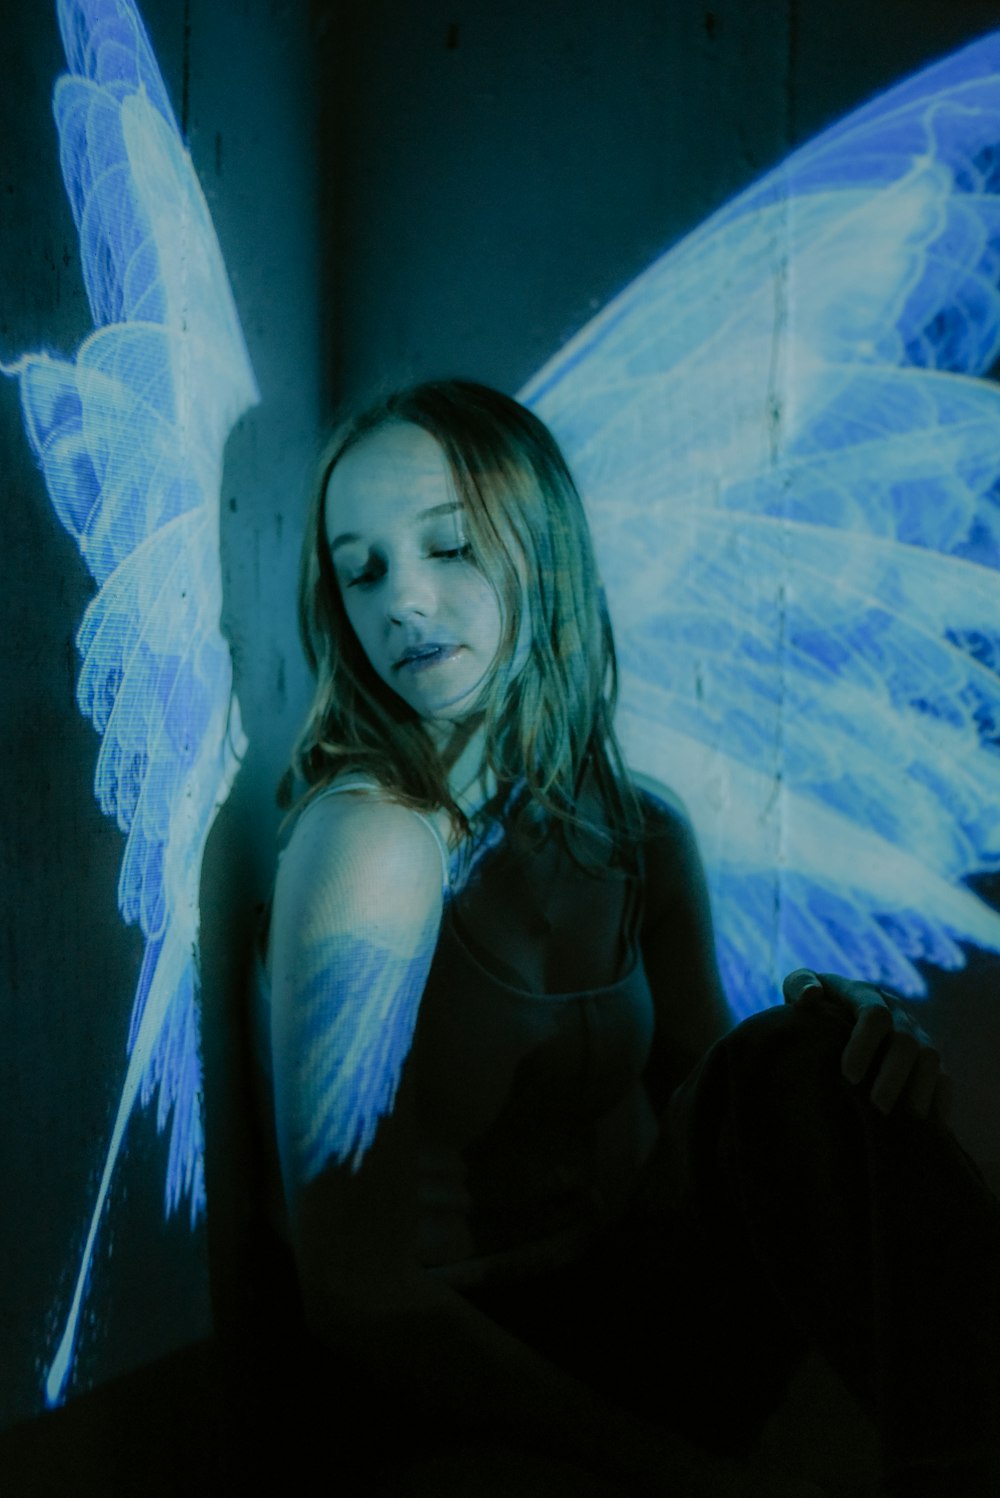 a woman with blue wings sitting in a dark room